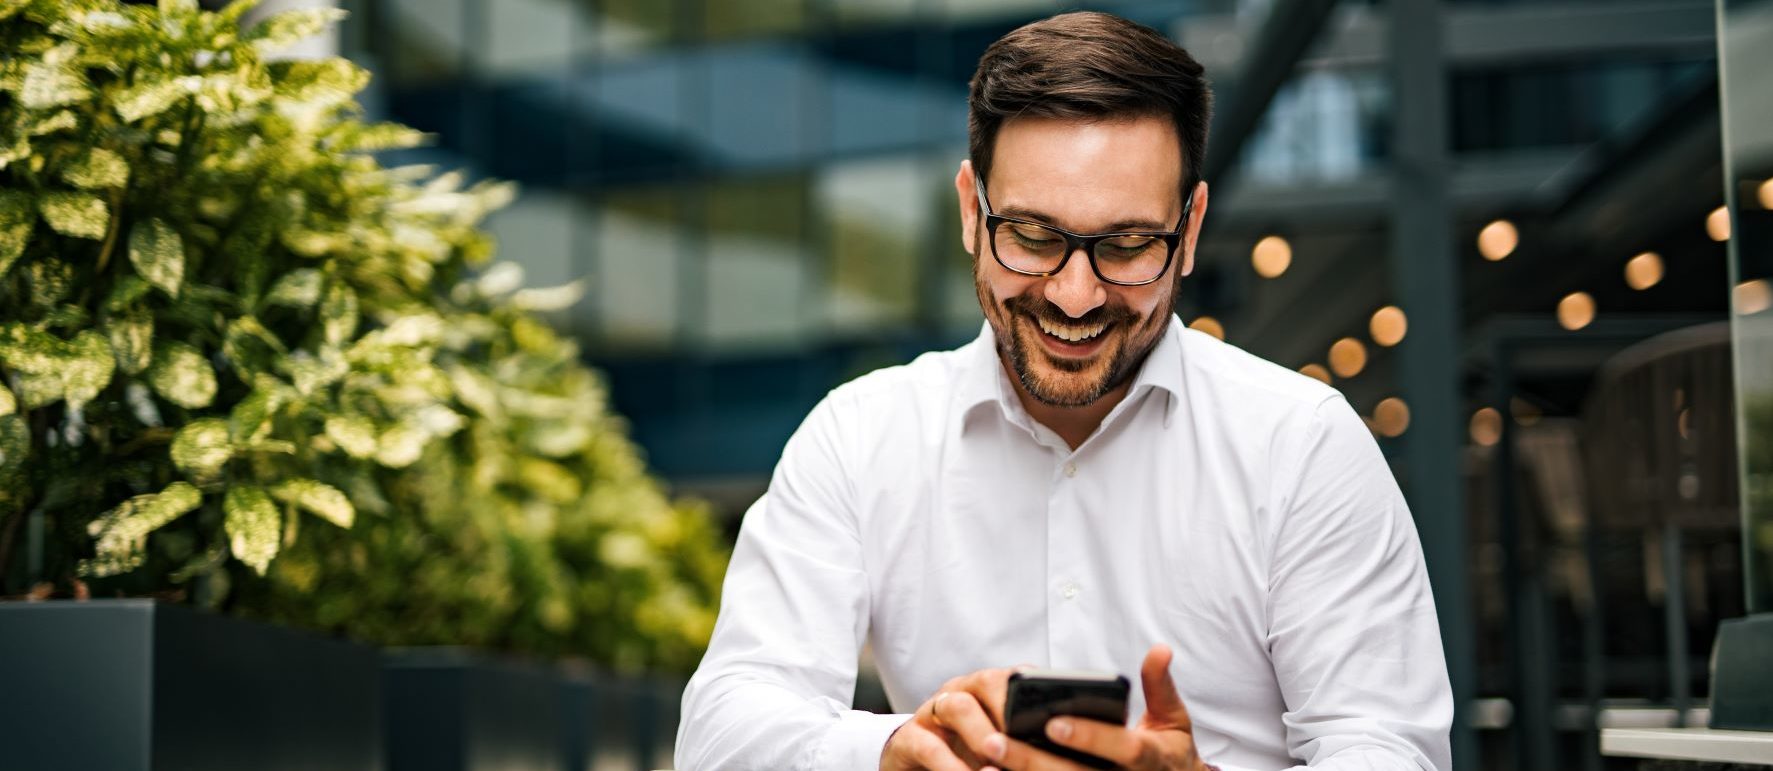 Man in glasses laughing and looking at his smartphone outdoors.